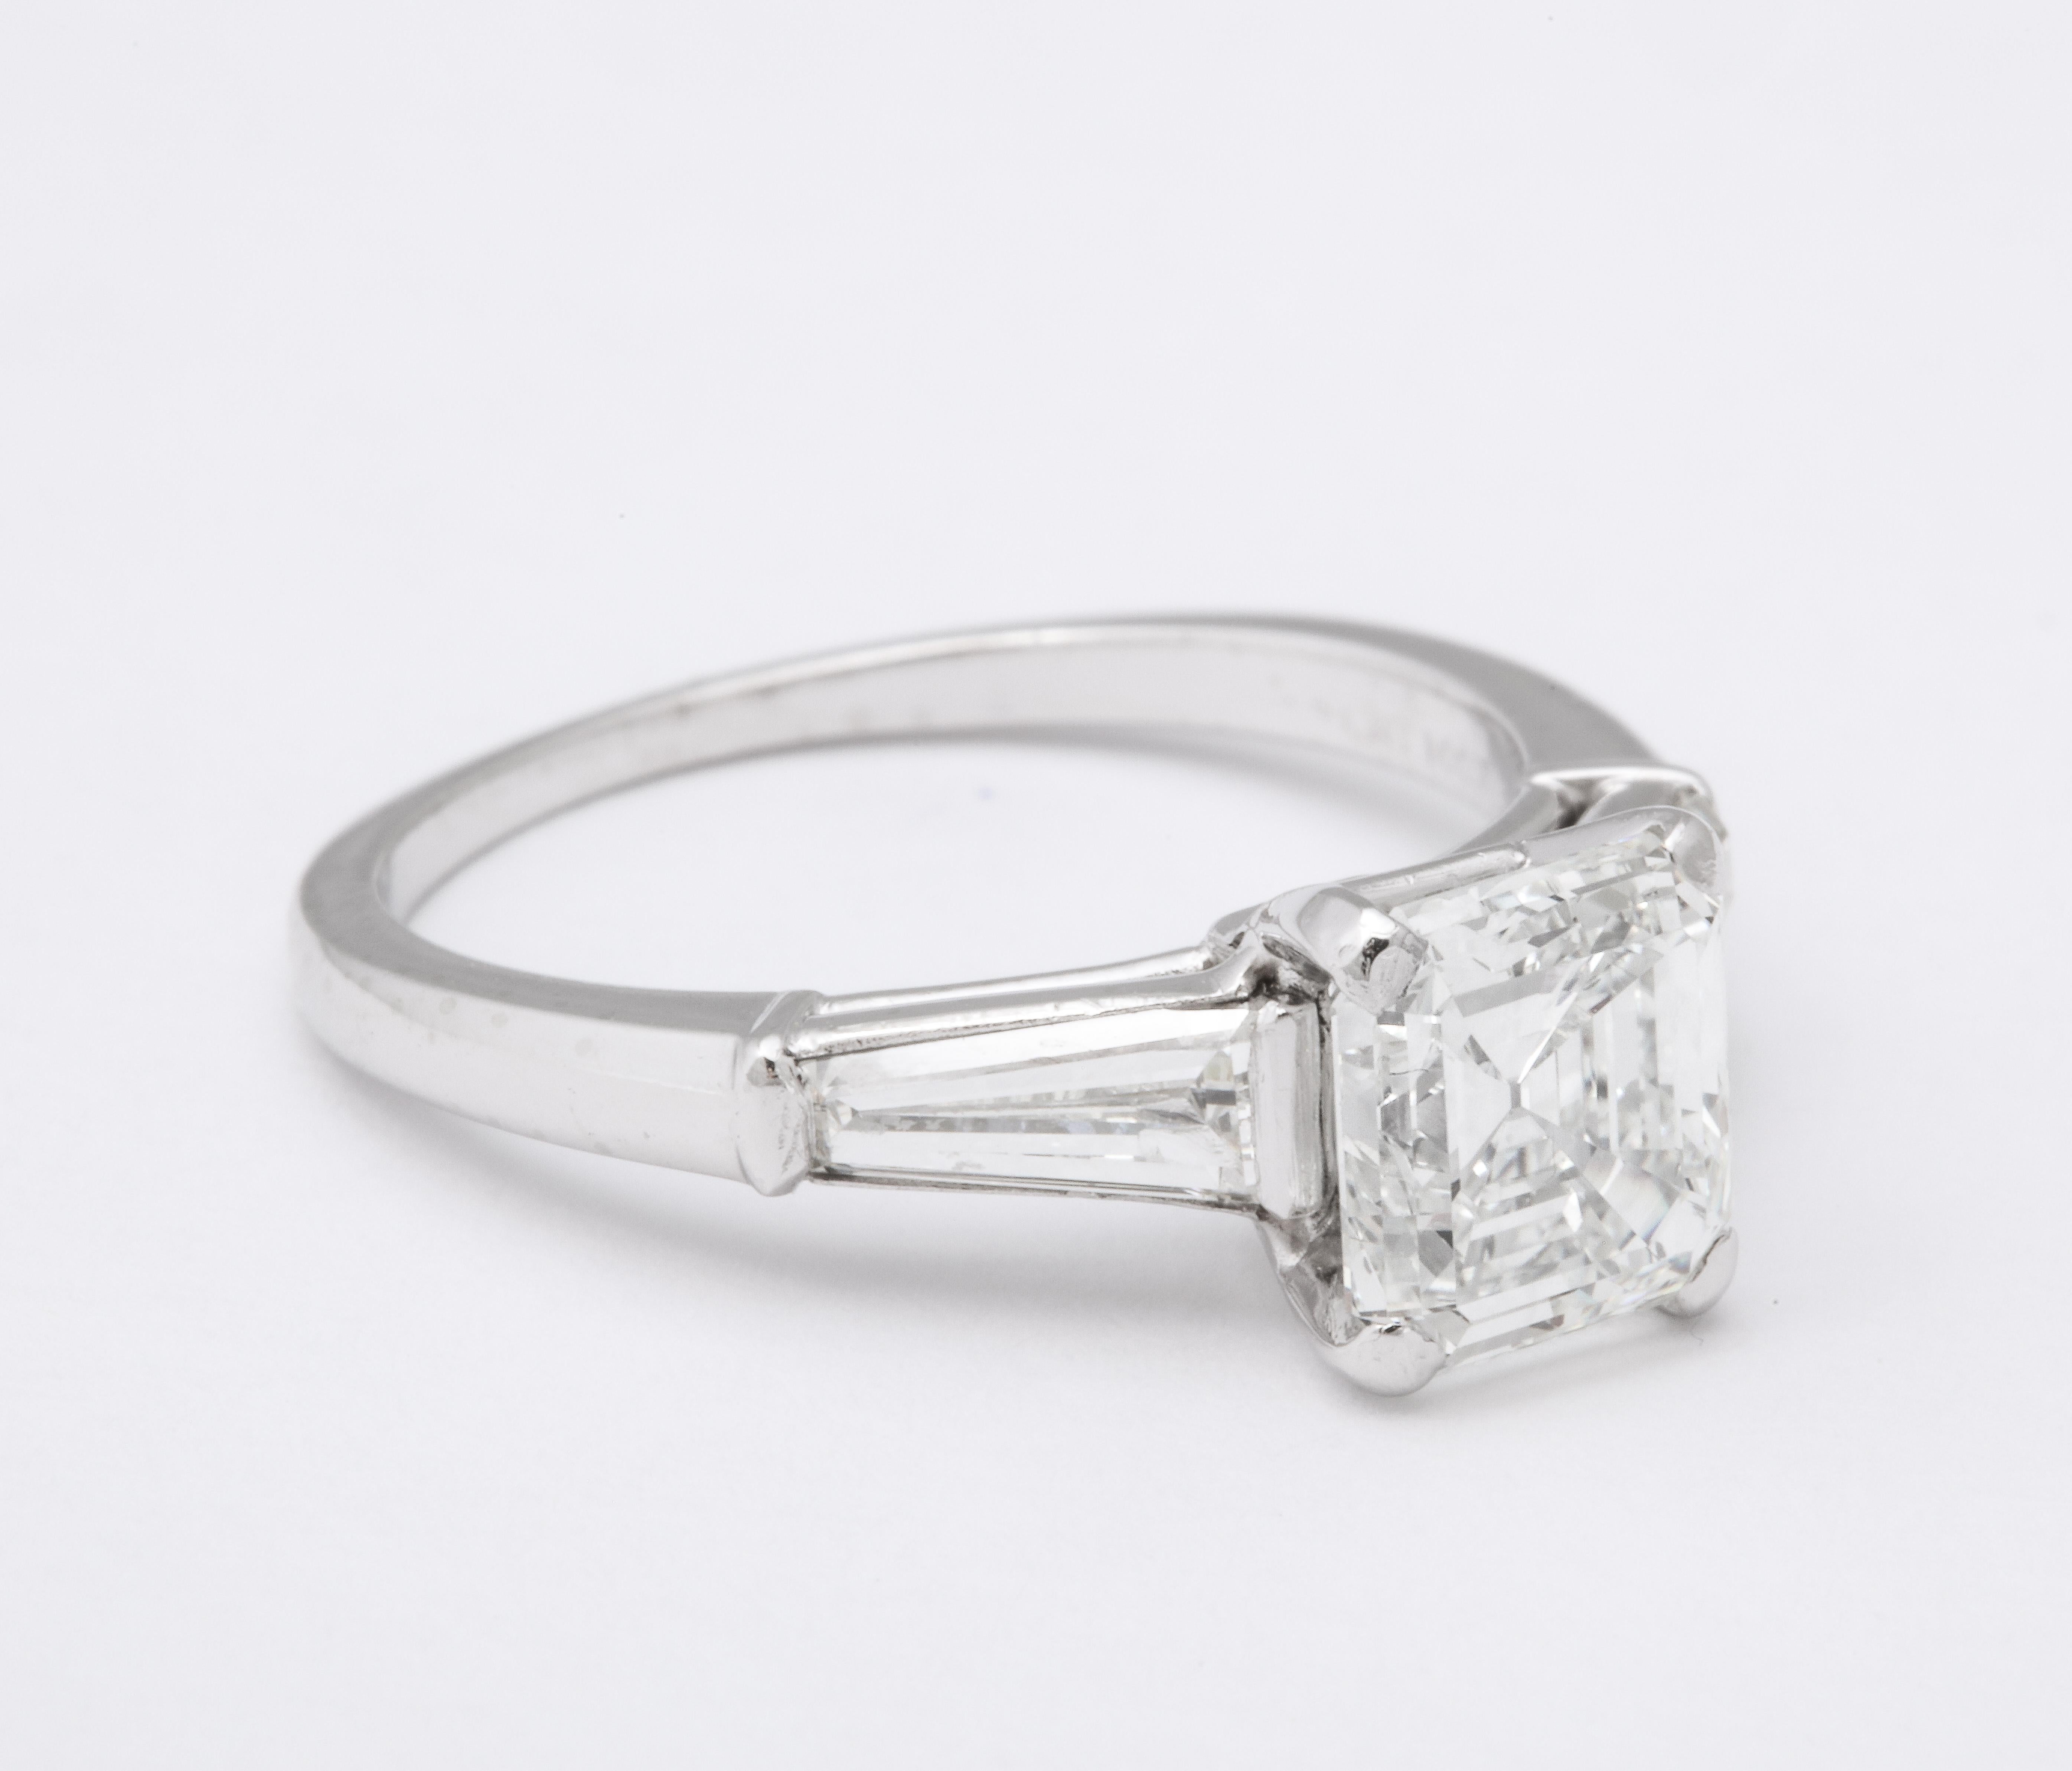 1.65cts square emerald cut diamond GIA certified G VVS2 set in platinum with tapered baguette diamonds. 
The design is classic and elegant and the stone is a wonderful shape.  GIA certification is included for your piece of mind and quality